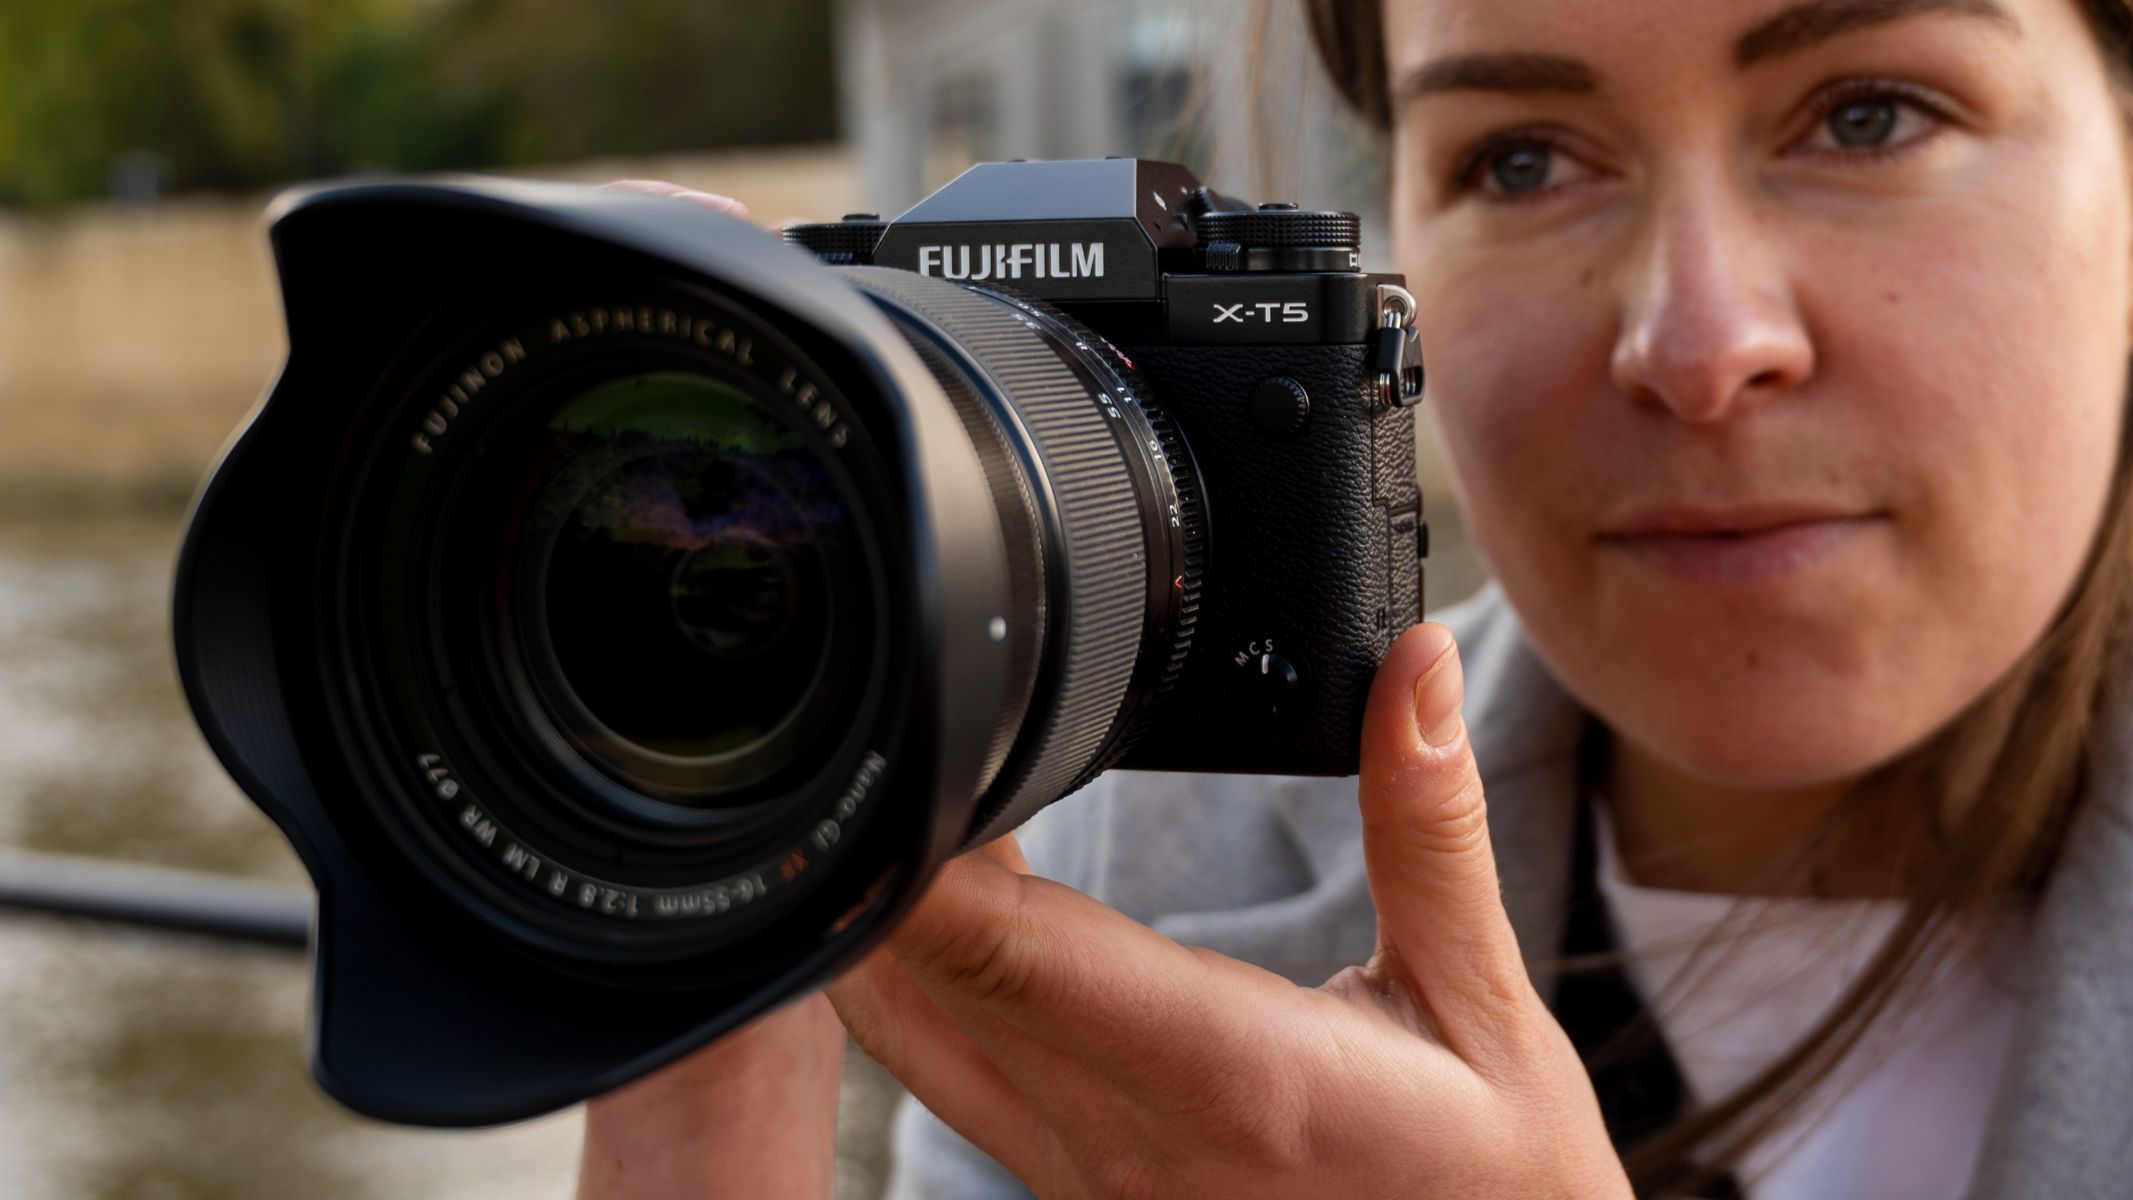 Can the Fujifilm XT-5 keep up with Full Frame?